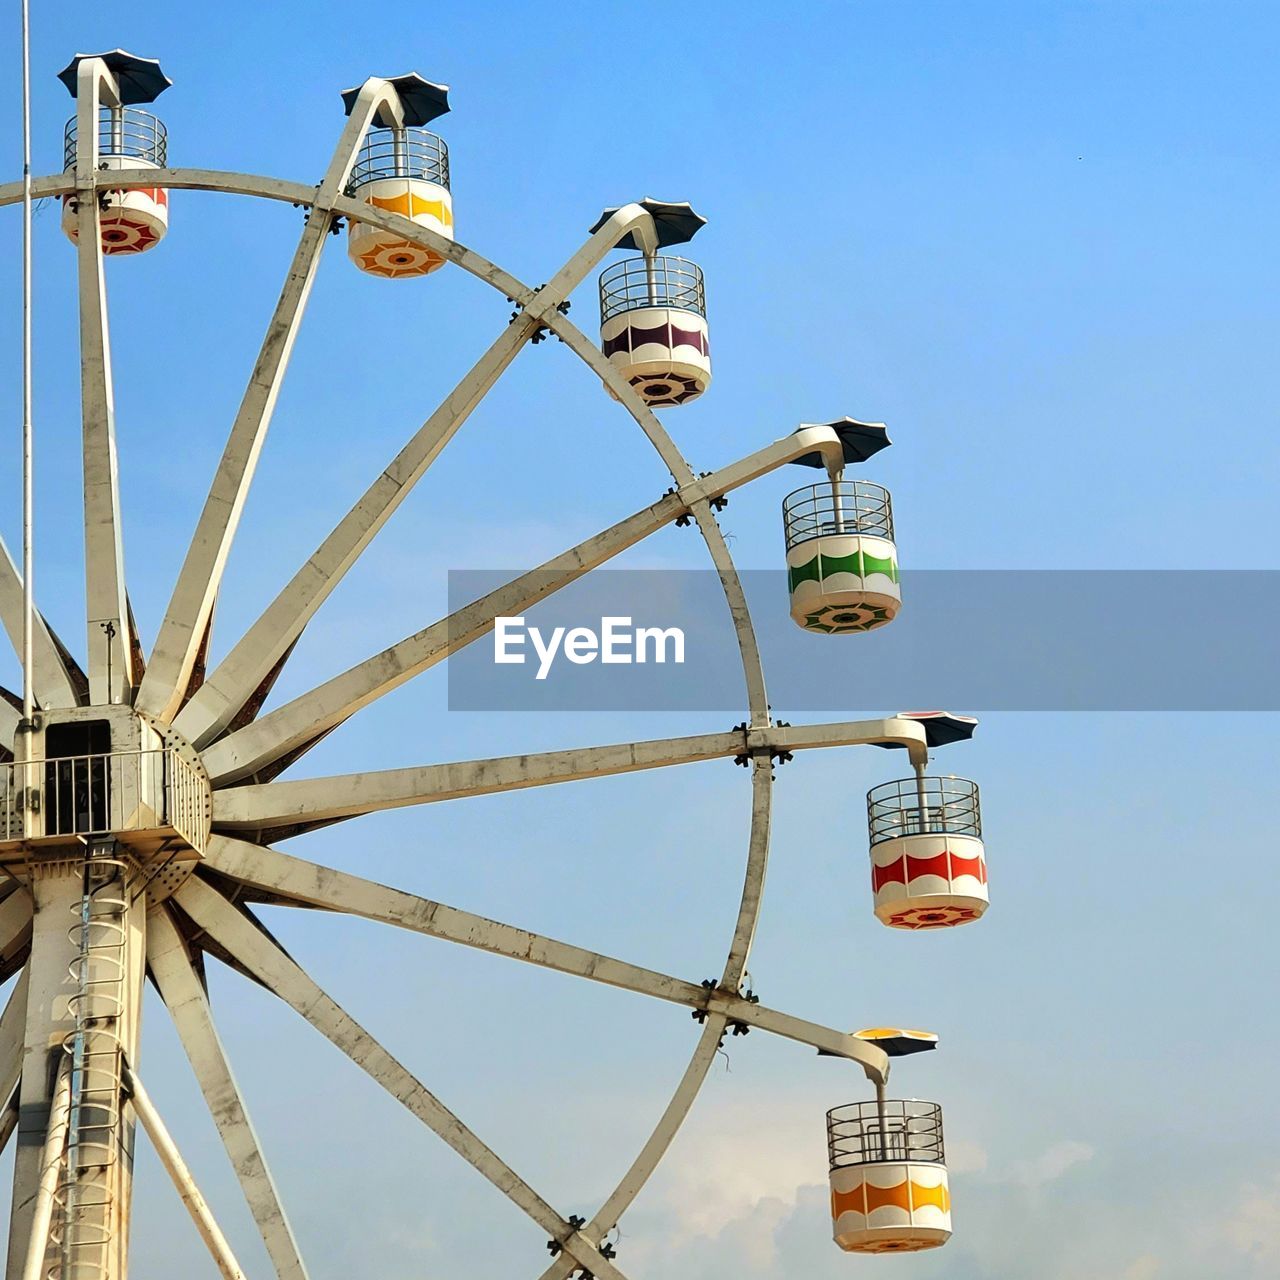 low angle view of ferris wheel against blue sky